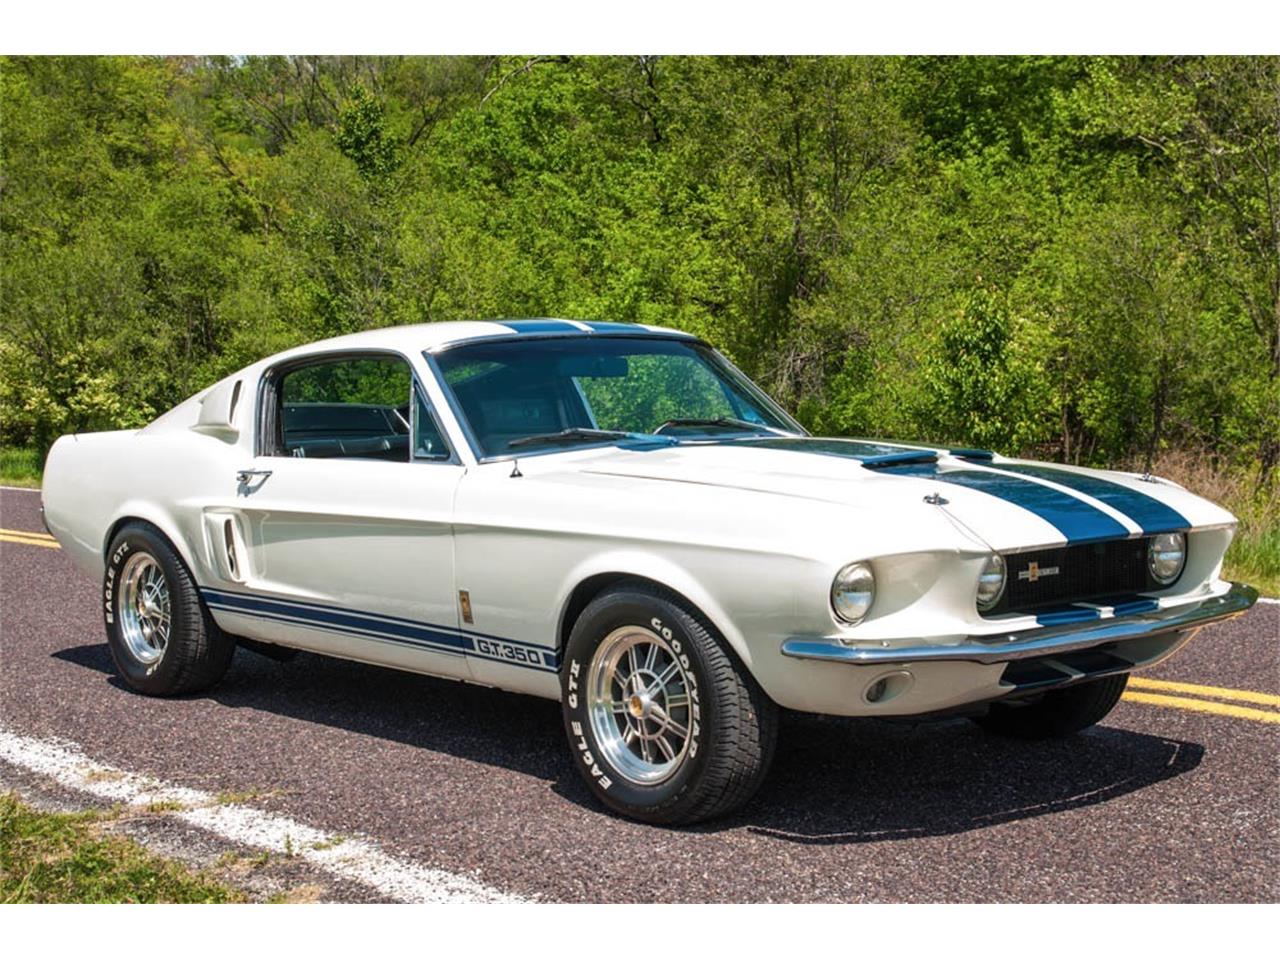 1967 Ford Mustang Shelby Tribute for Sale | ClassicCars.com | CC-981185